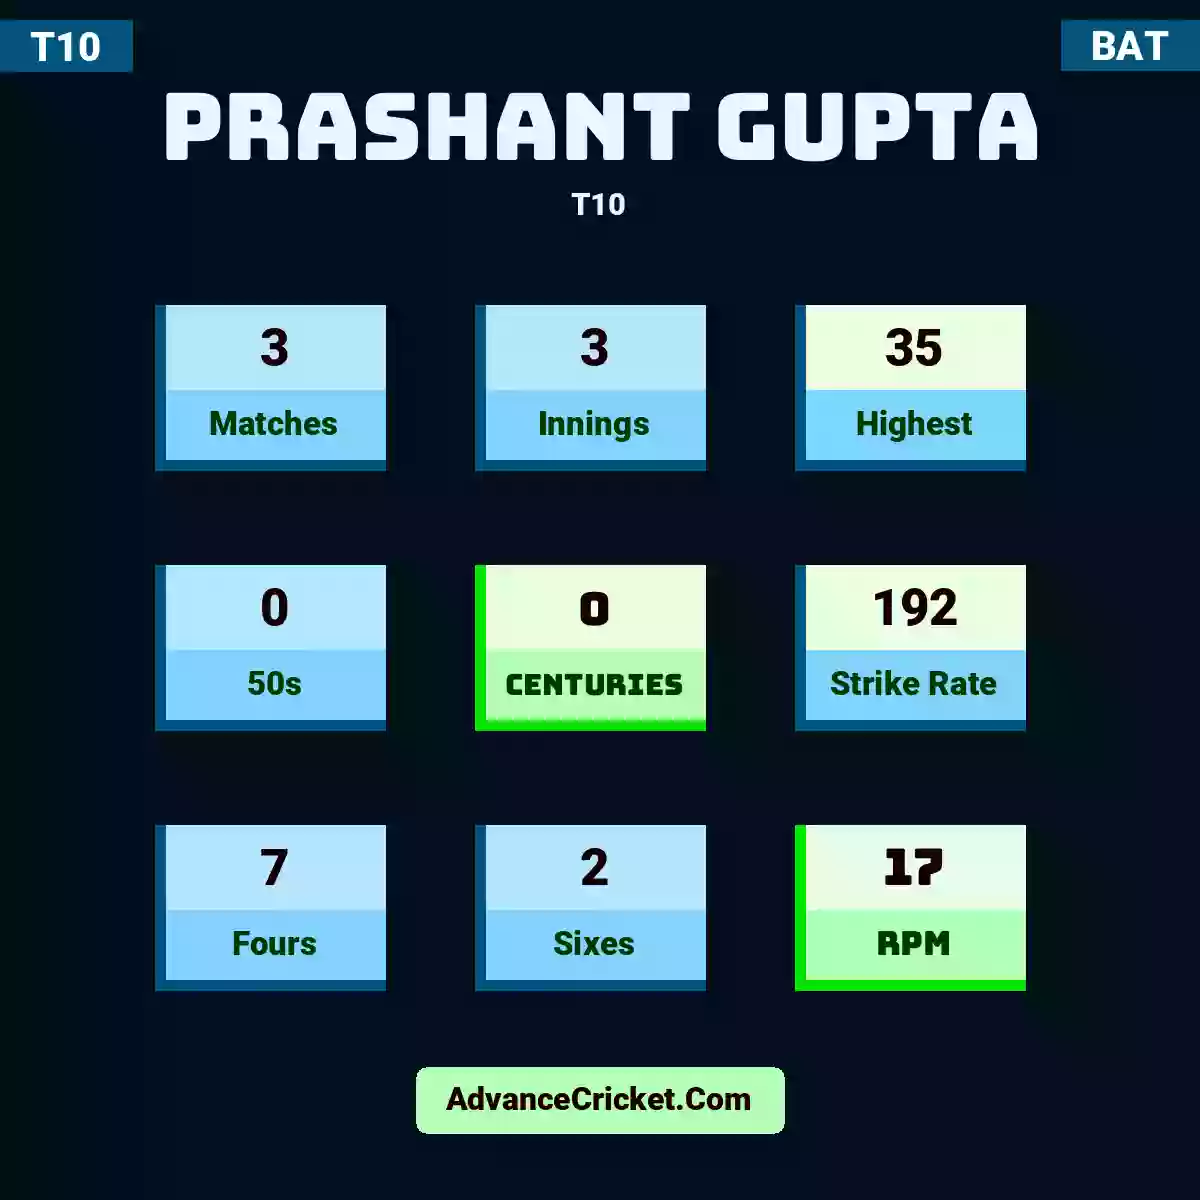 Prashant Gupta T10 , Prashant Gupta played 3 matches, scored 35 runs as highest, 0 half-centuries, and 0 centuries, with a strike rate of 192. P.Gupta hit 7 fours and 2 sixes, with an RPM of 17.